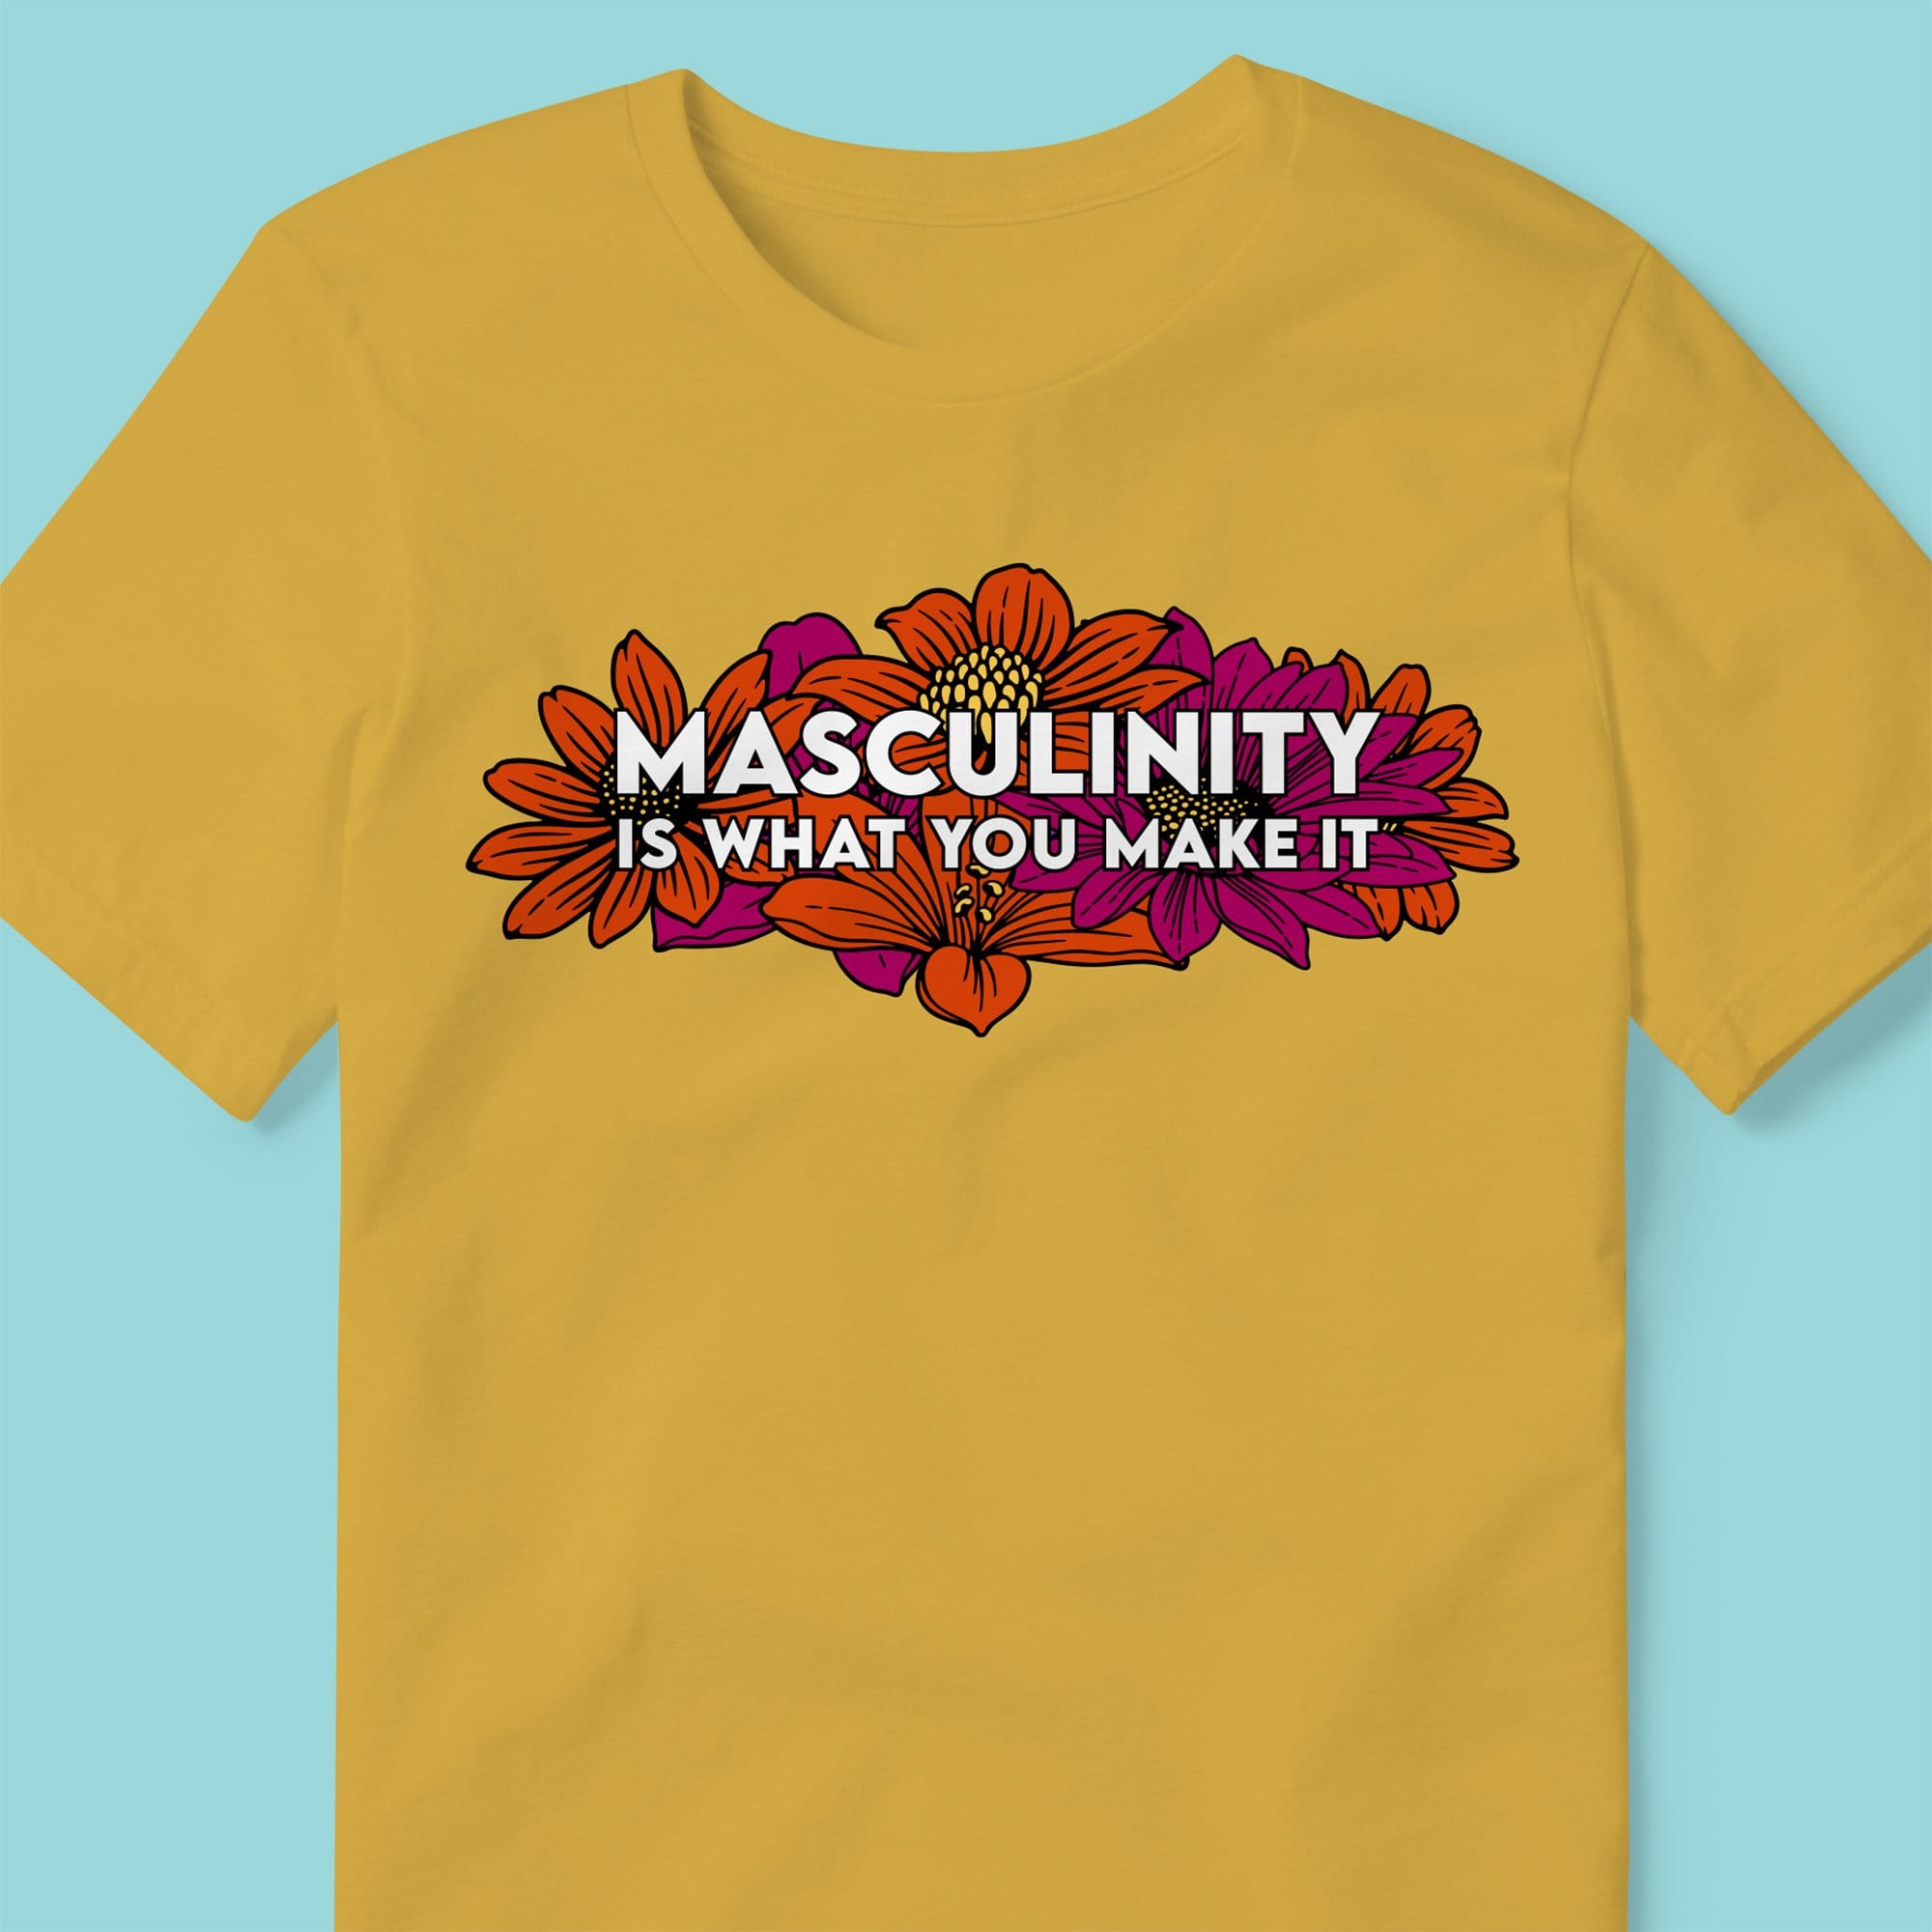 Masculinity Is What You Make It T-shirt